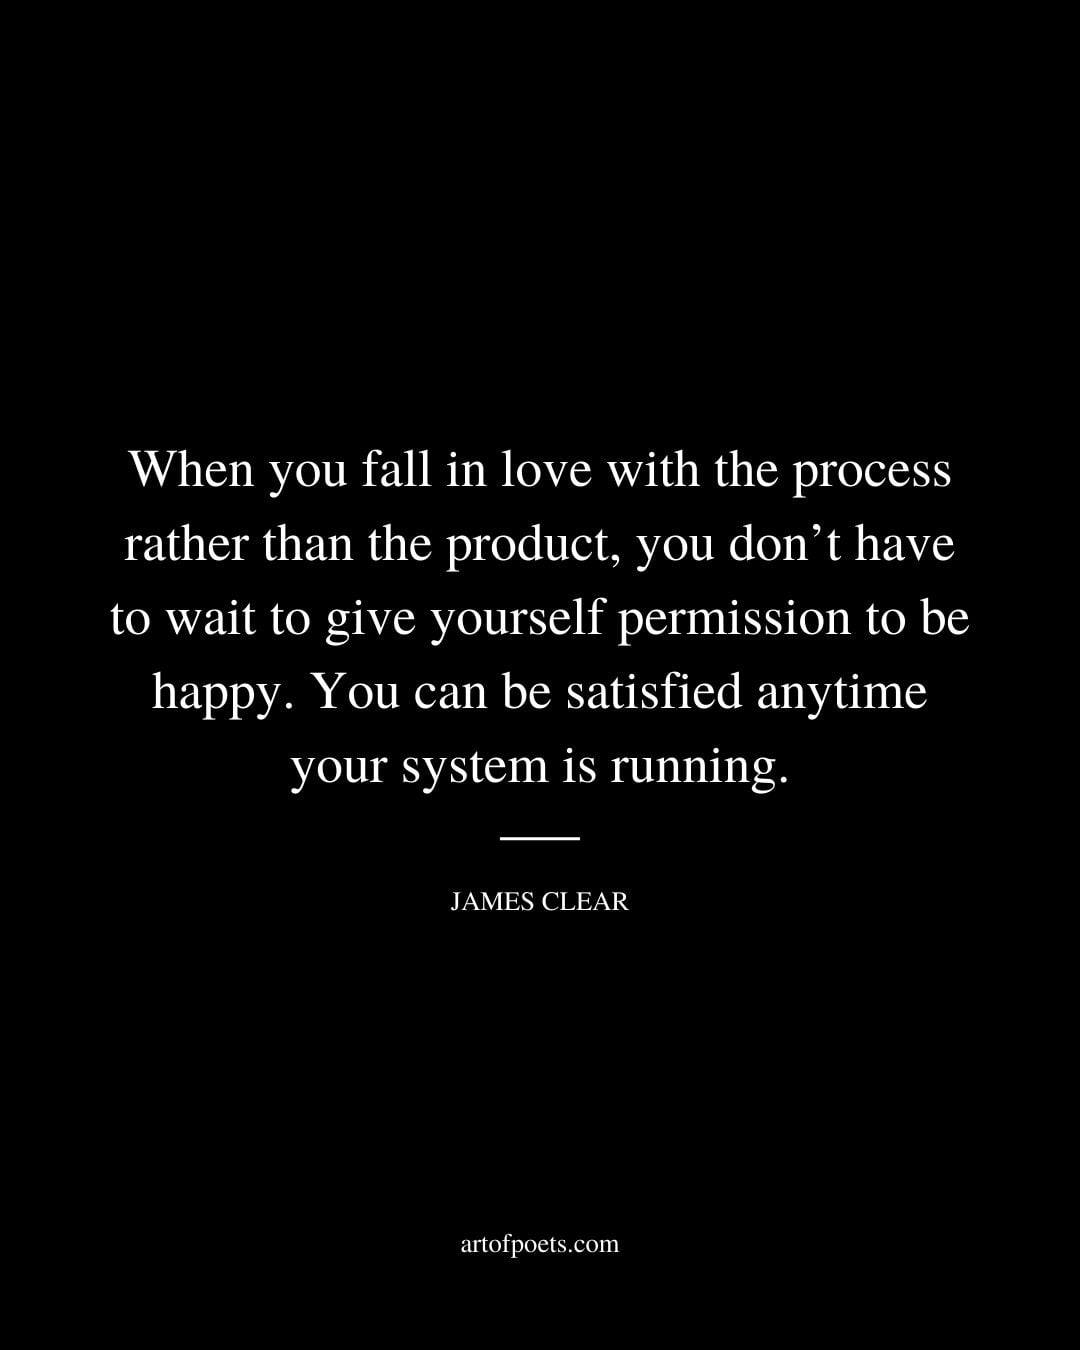 When you fall in love with the process rather than the product you dont have to wait to give yourself permission to be happy. You can be satisfied anytime your system is running